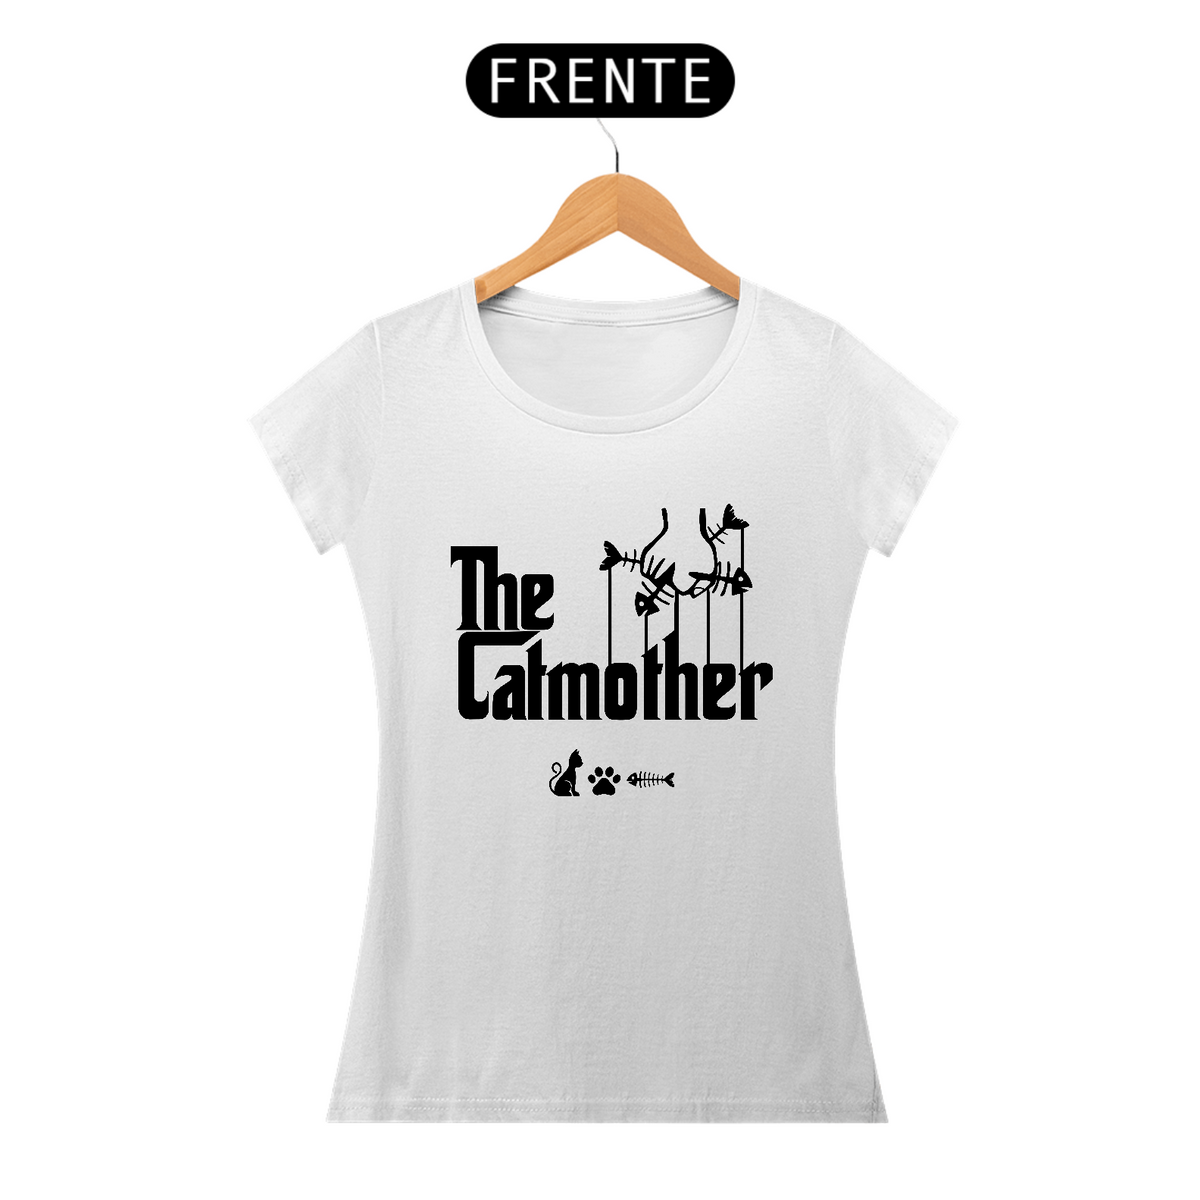 Nome do produto: Camisa Baby Long Prime Catmother